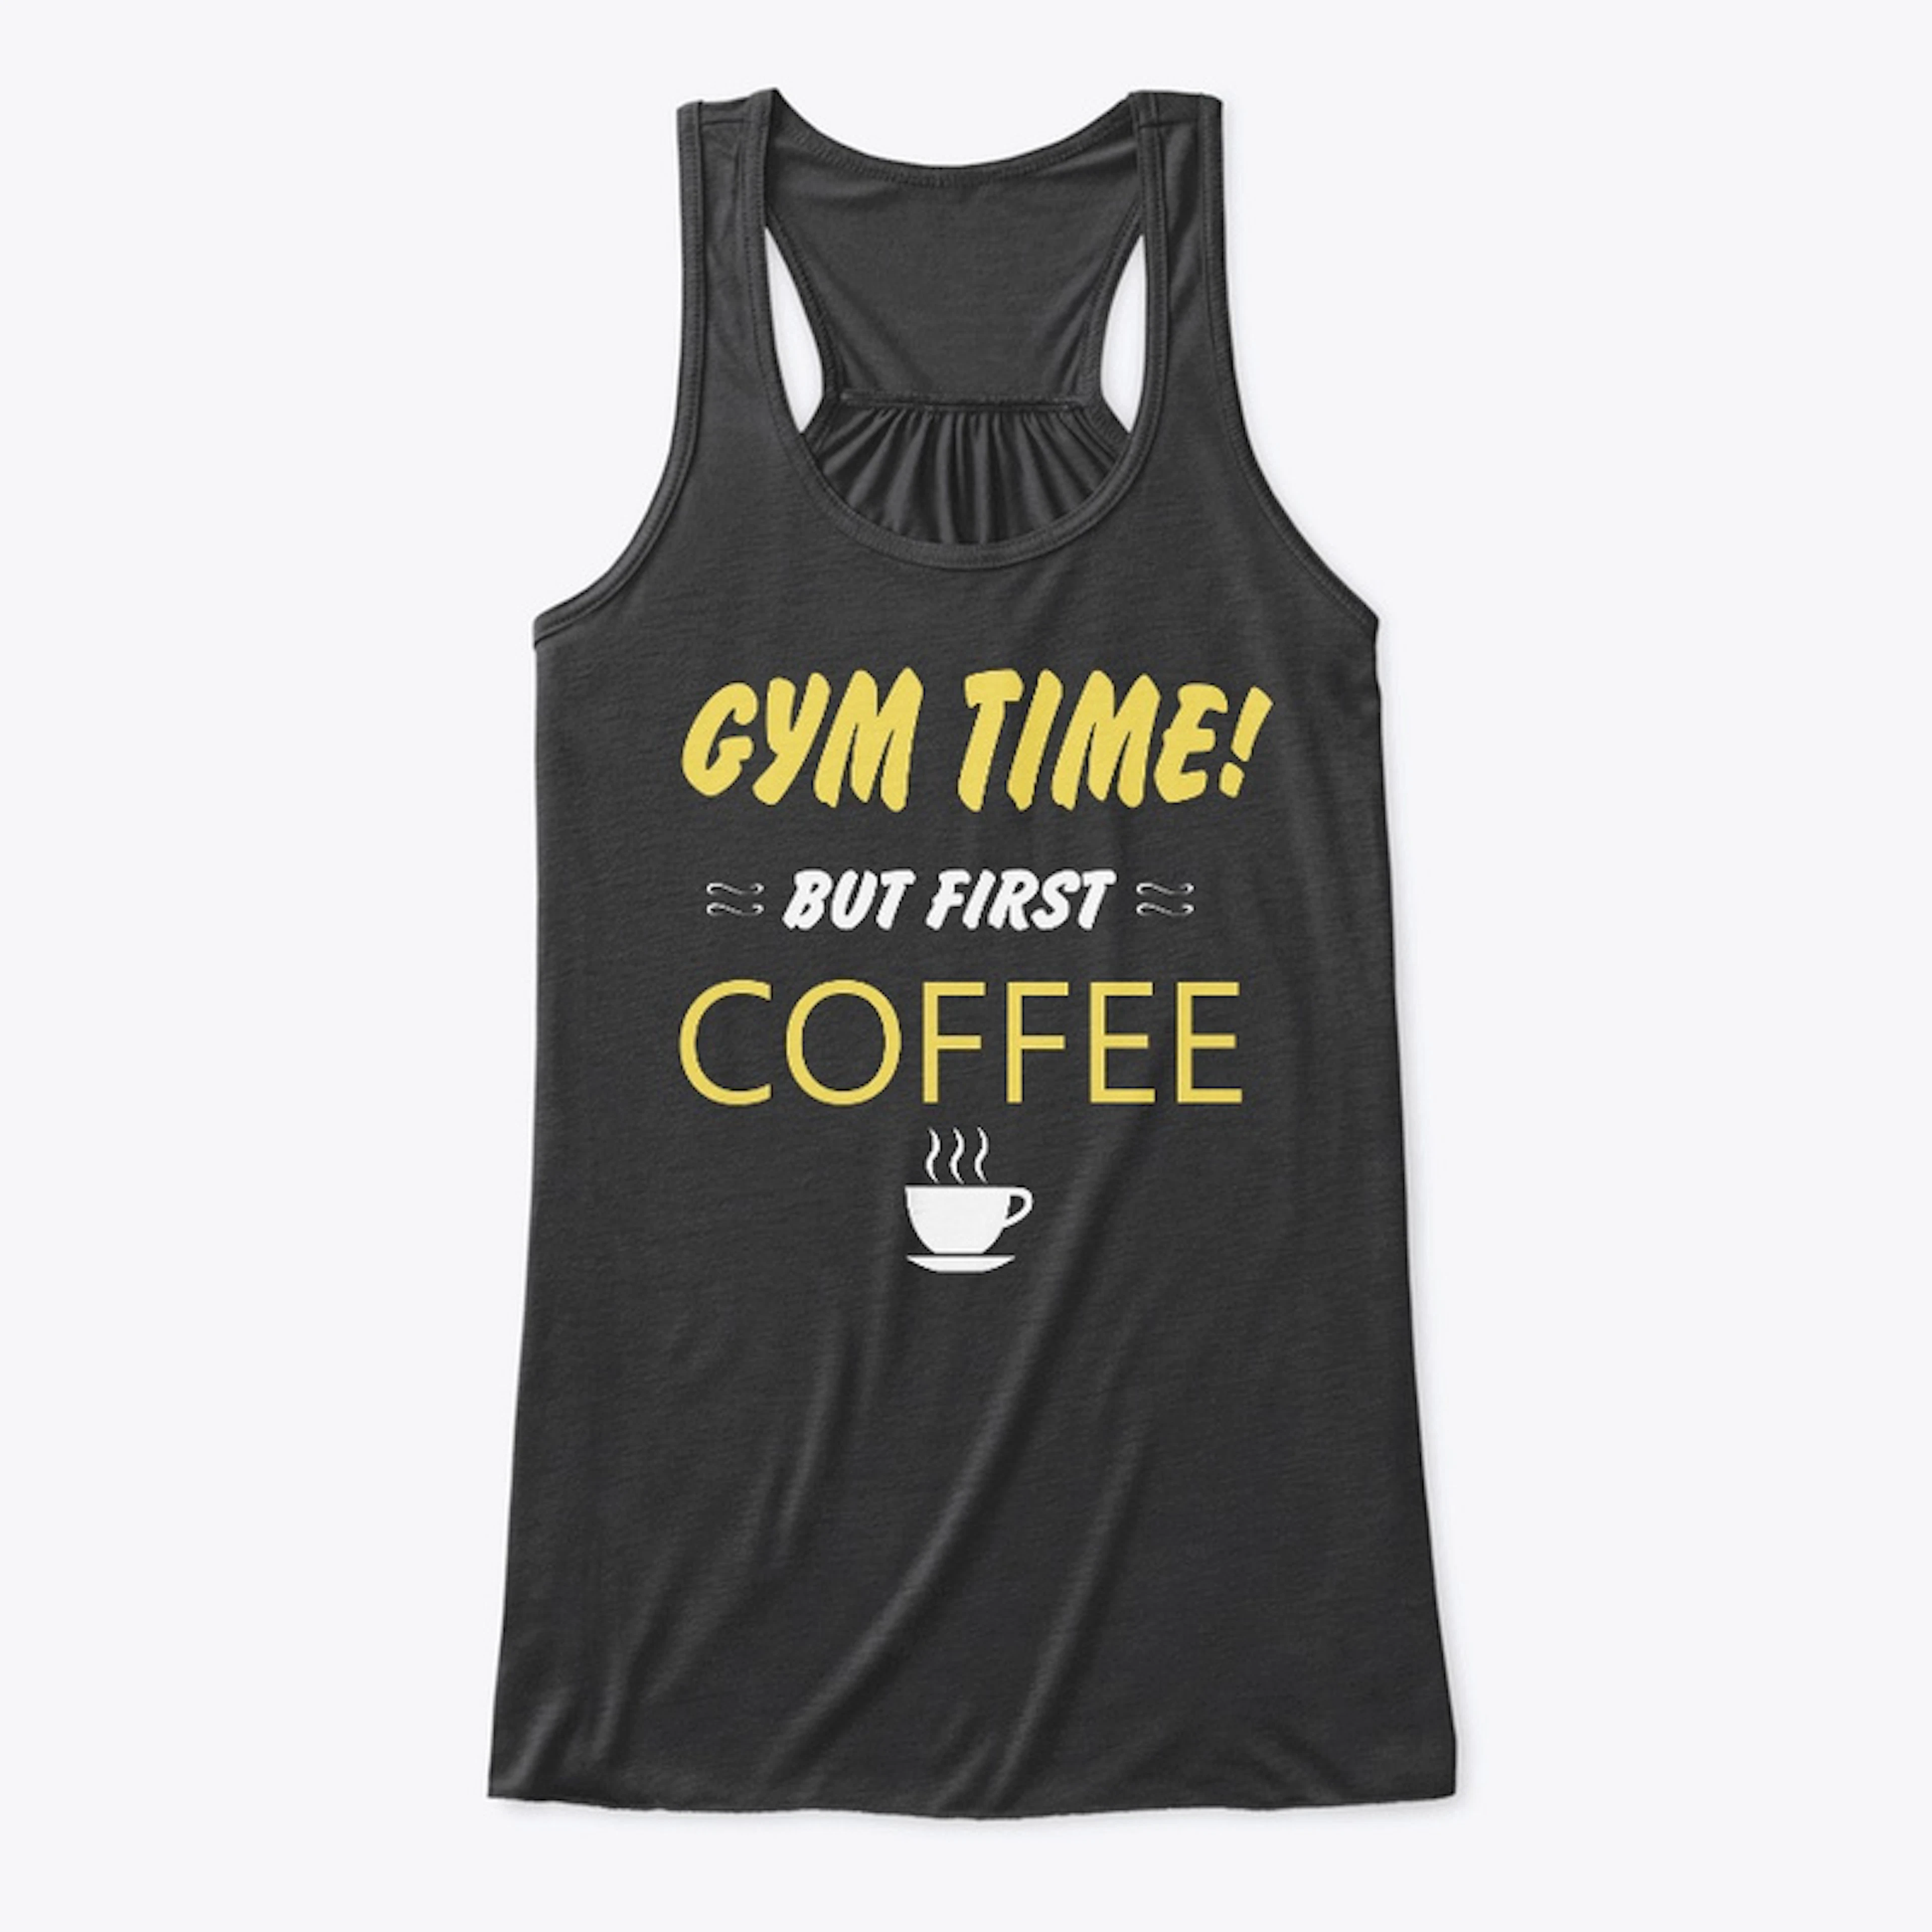 Gym Time! But First Coffee